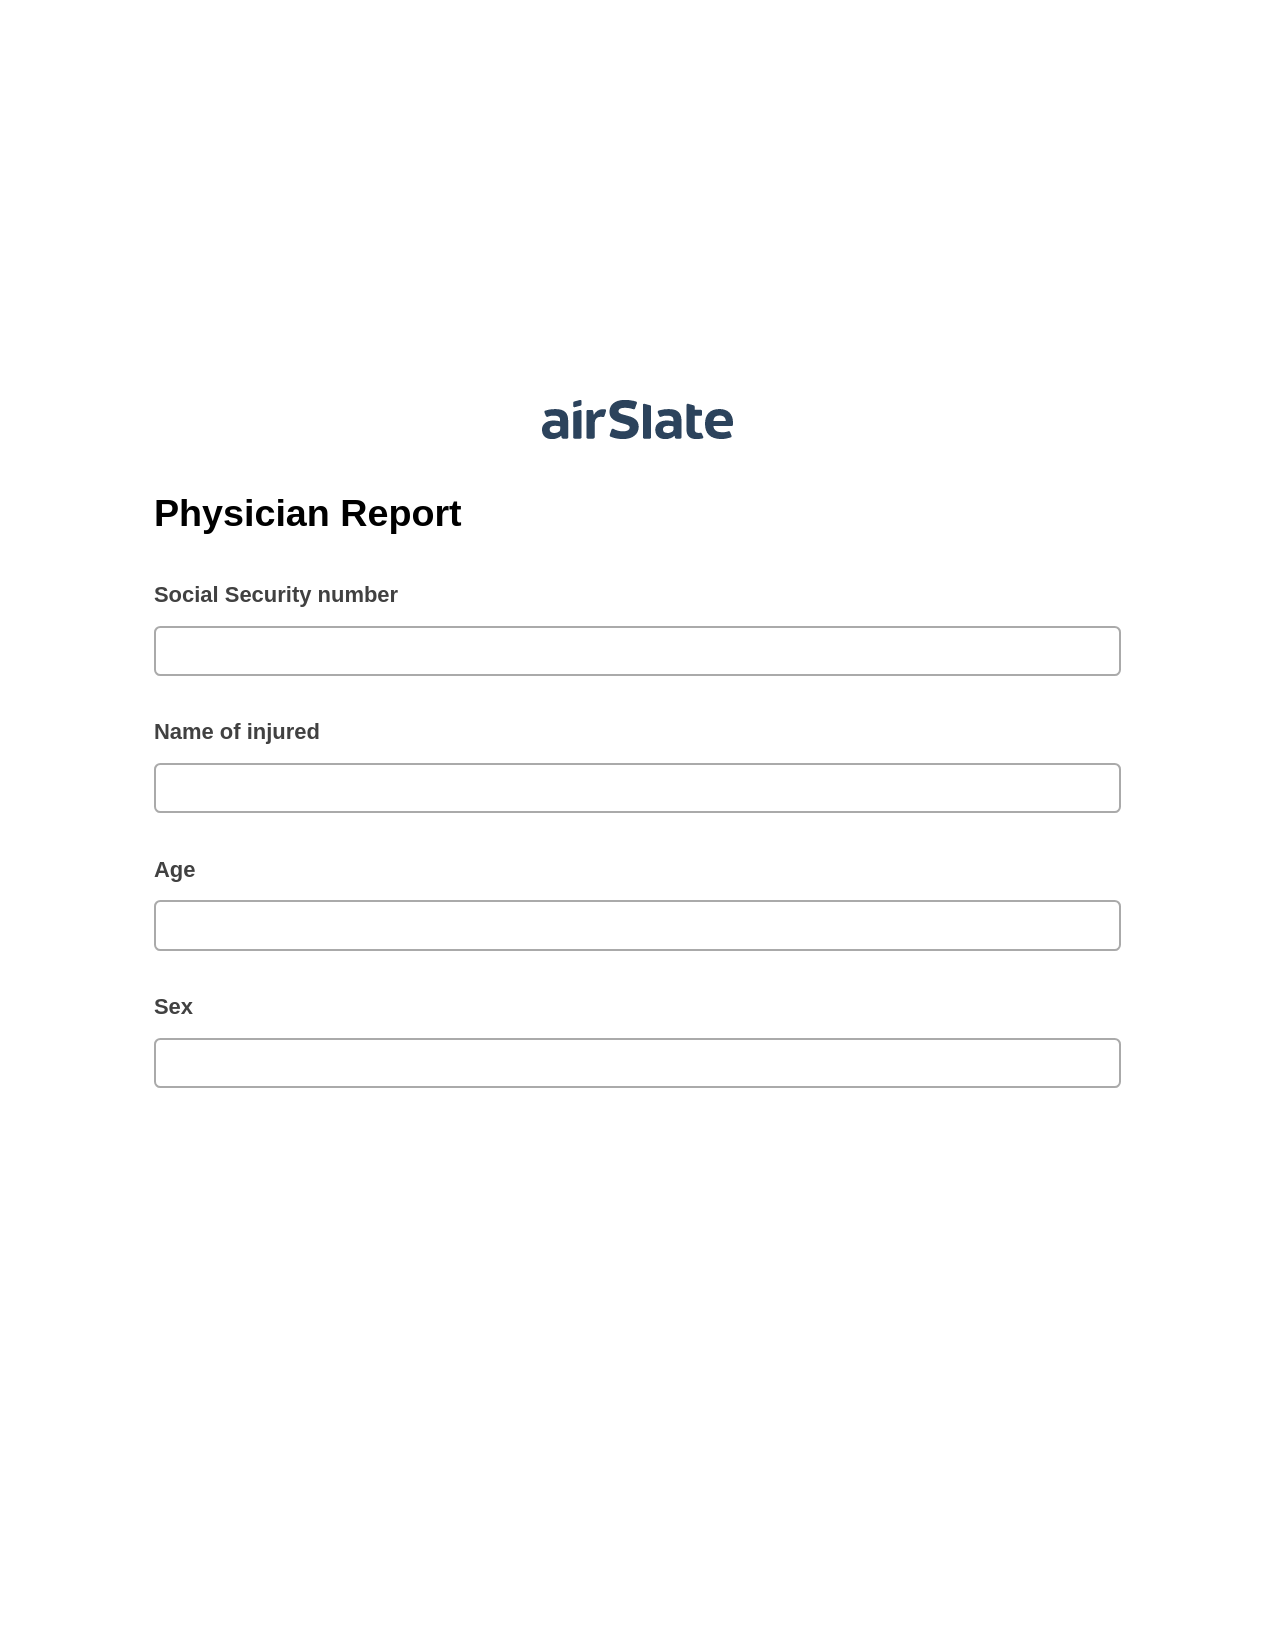 Physician Report Pre-fill from Salesforce Records Bot, Update NetSuite Record Bot, Archive to OneDrive Bot